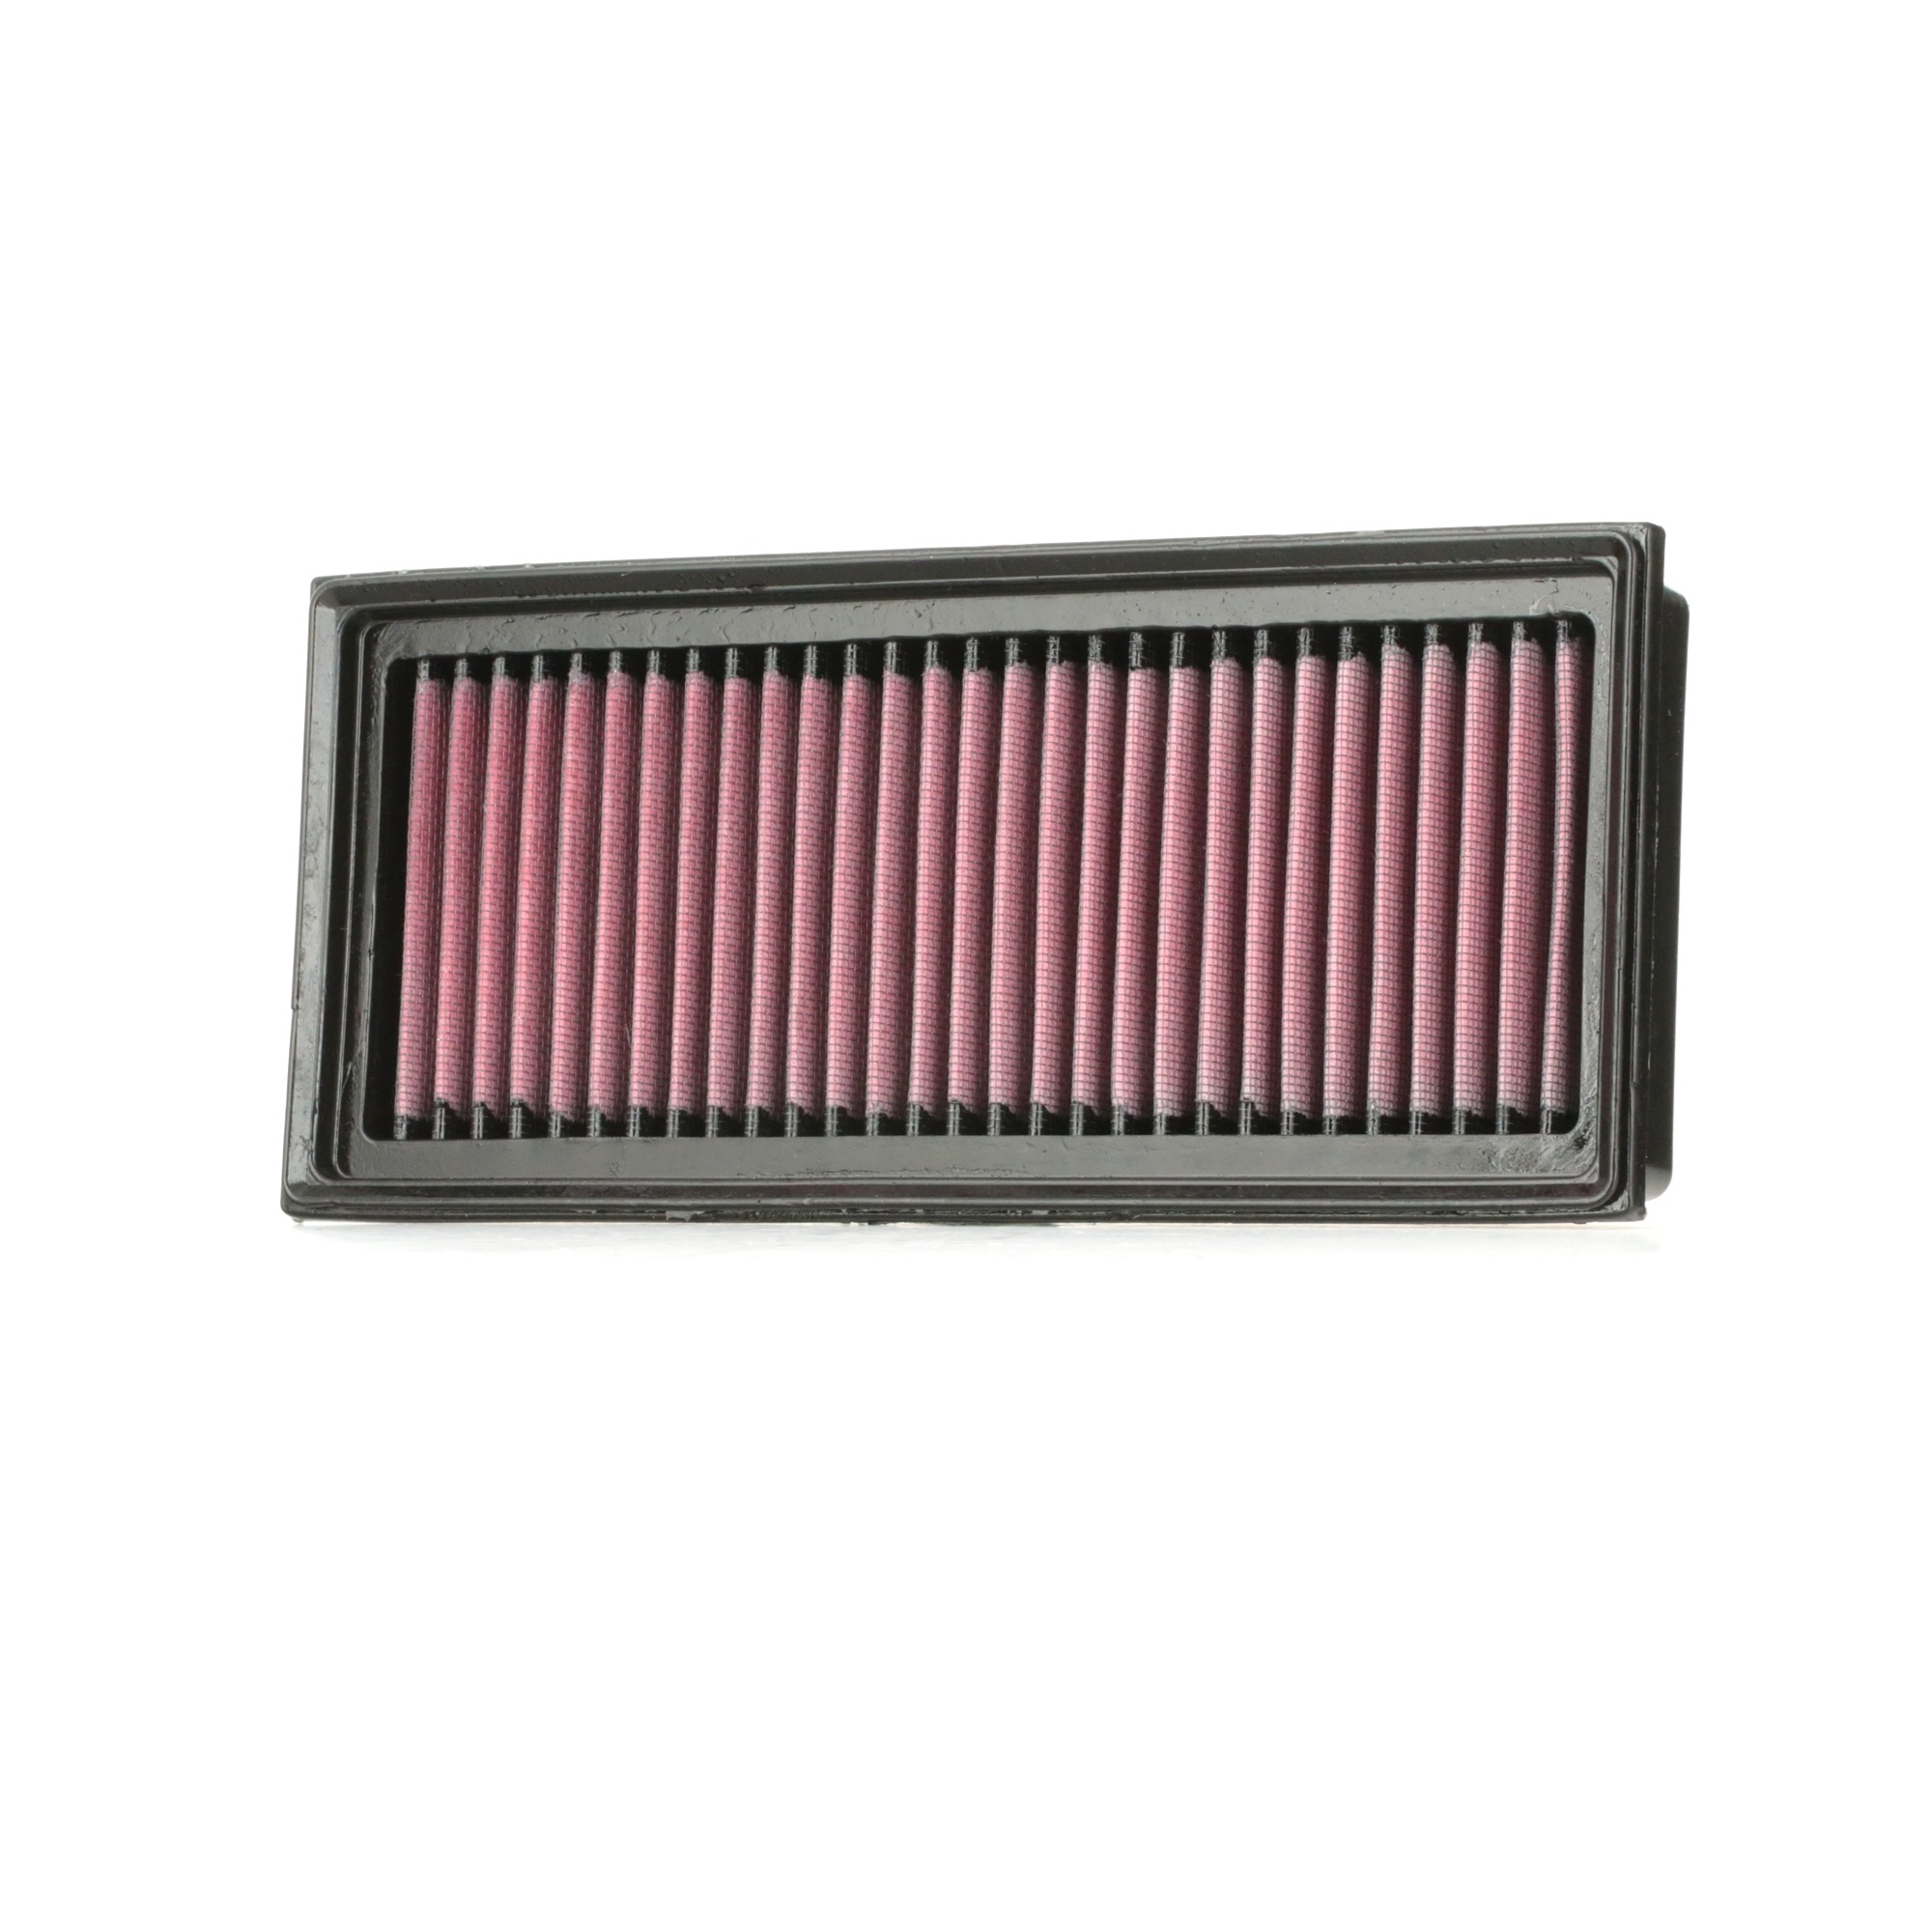 K&N Filters 44mm, 129mm, 287mm, Square, Long-life Filter Length: 287mm, Width: 129mm, Height: 44mm Engine air filter 33-3072 buy